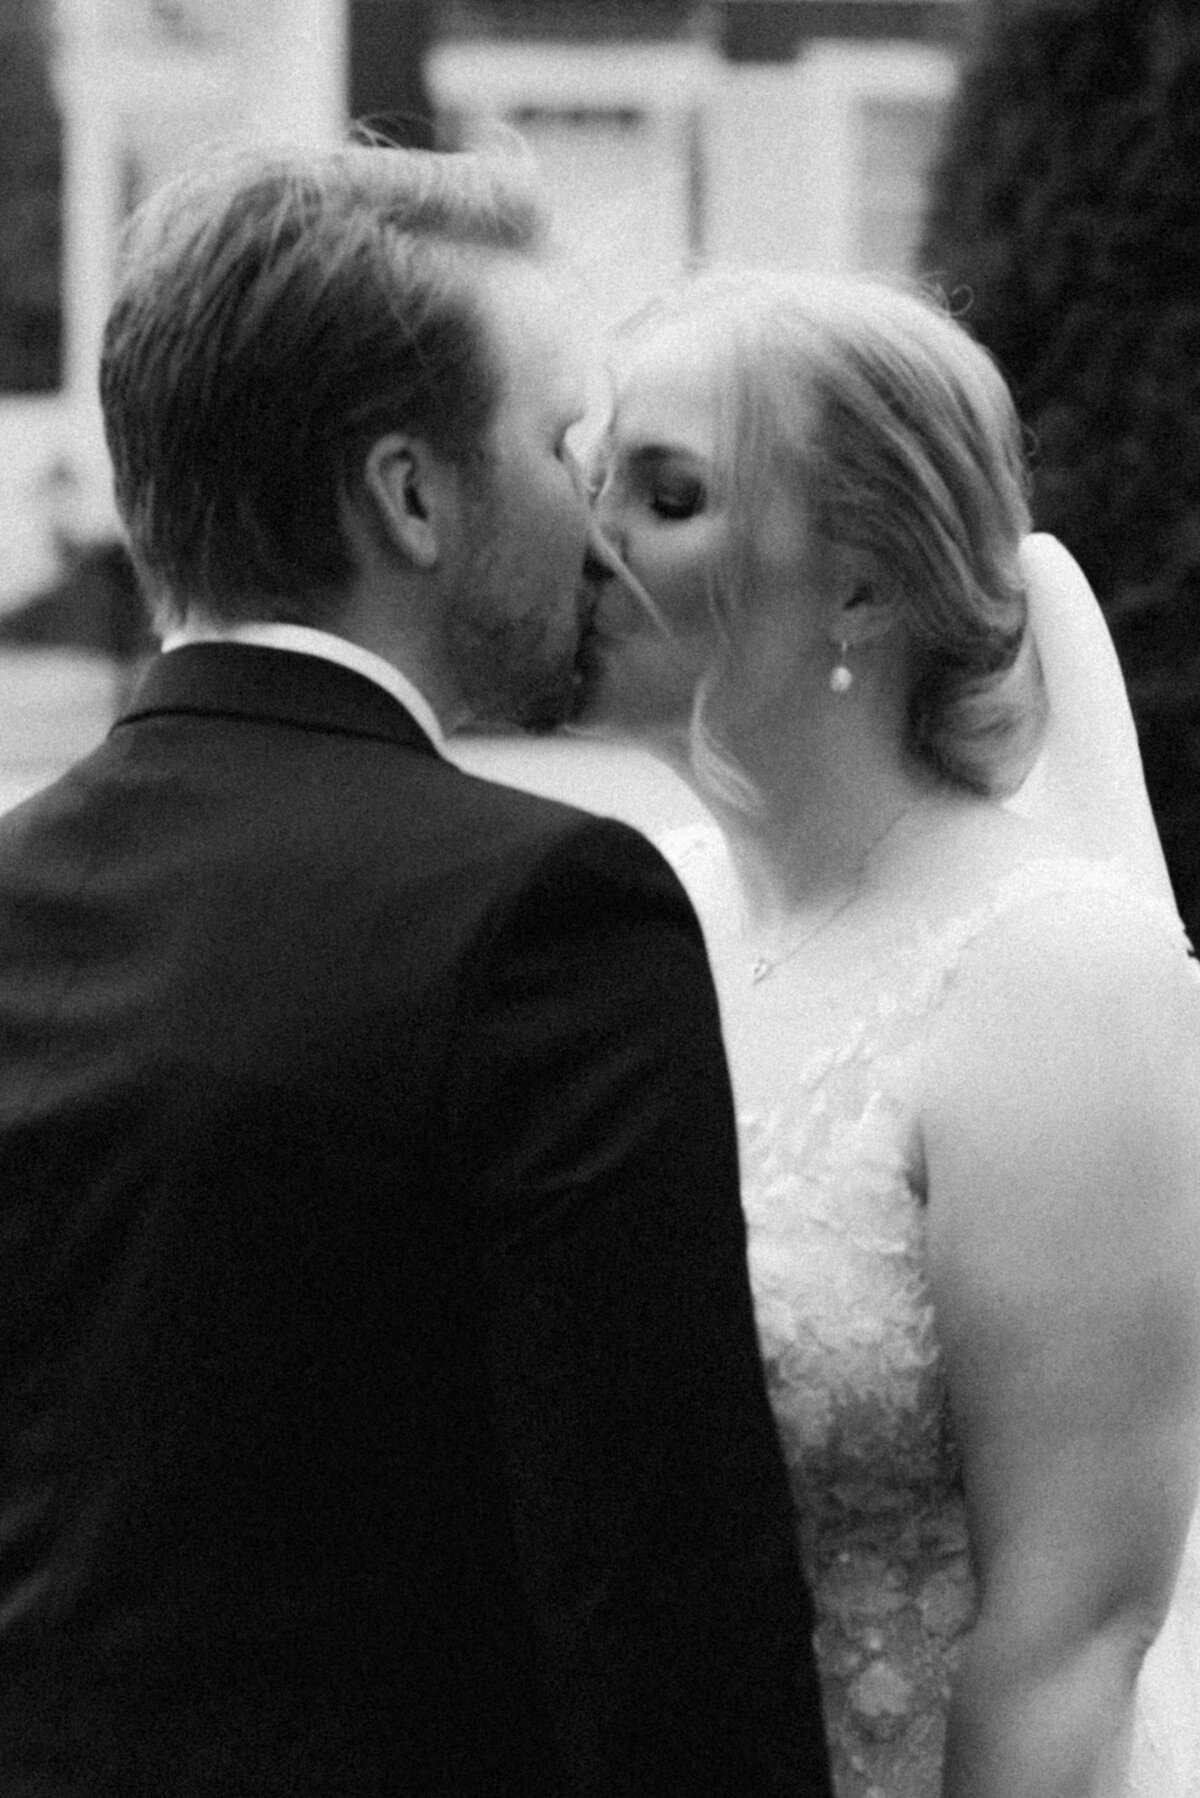 The wedding couple kissing in the ceremony photographed by wedding photographer Hannika Gabrielsson.